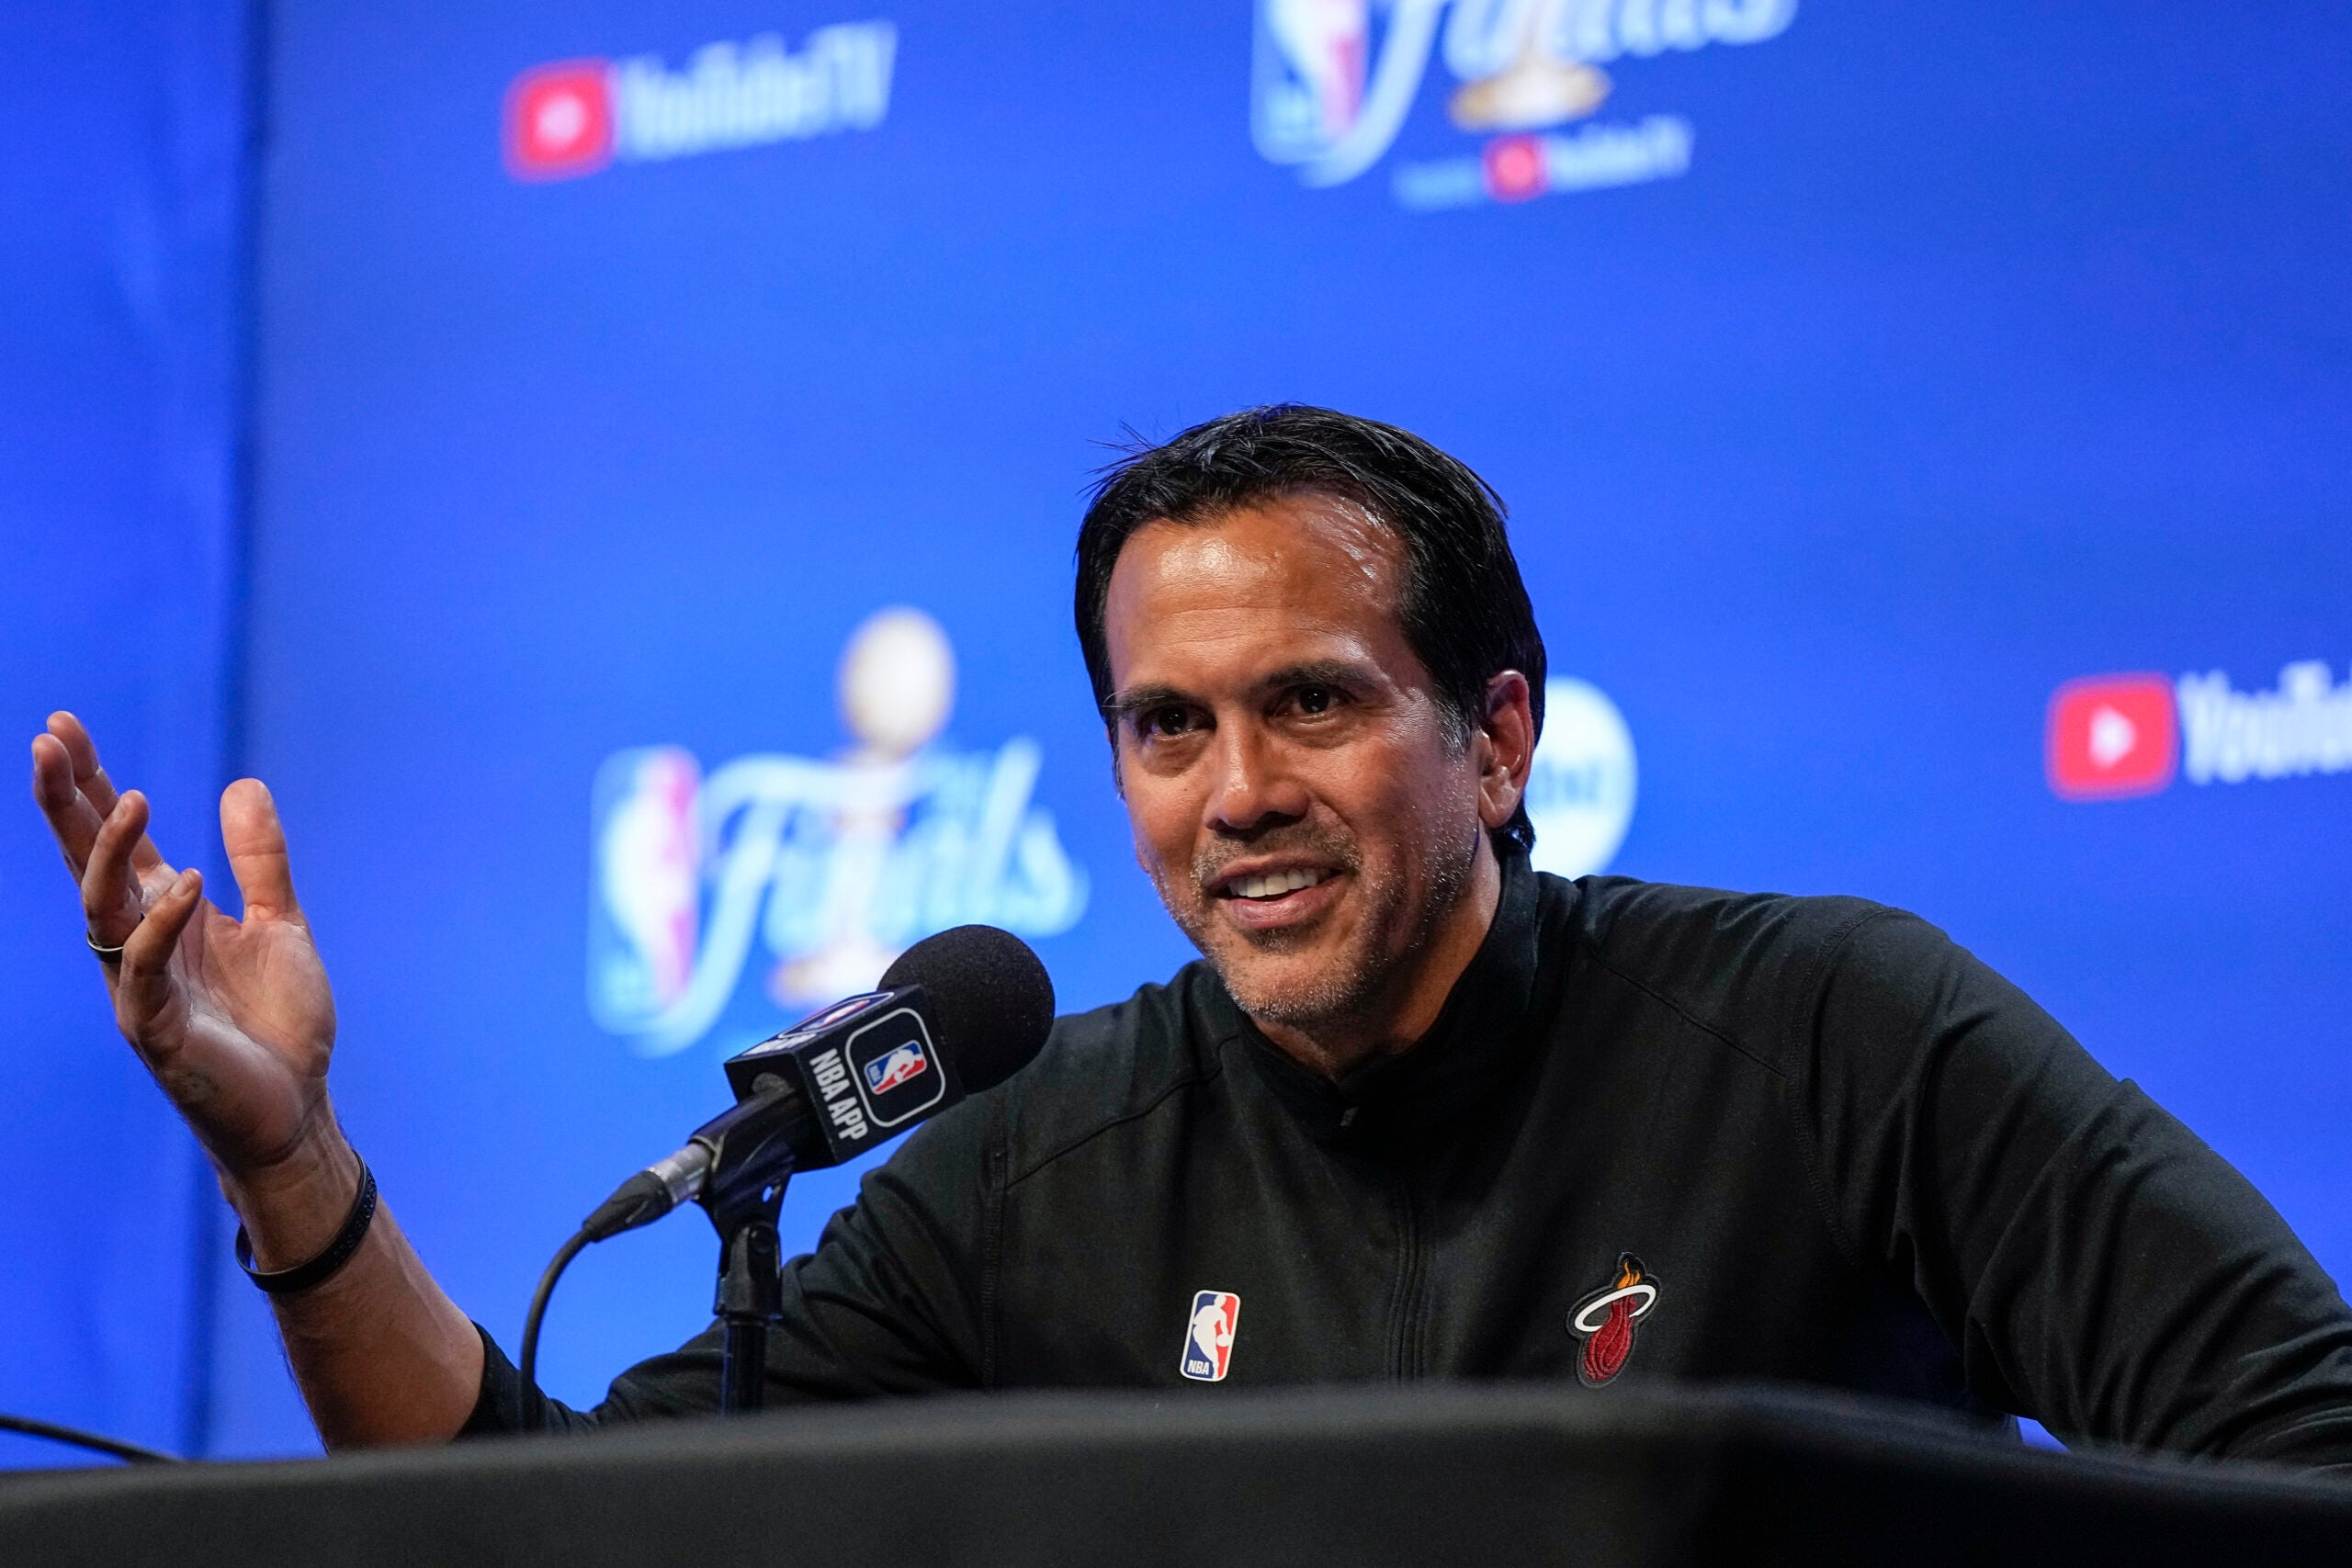 Miami Heat head coach Erik Spoelstra speaks to reporters after Game 2 of basketball's NBA Finals.